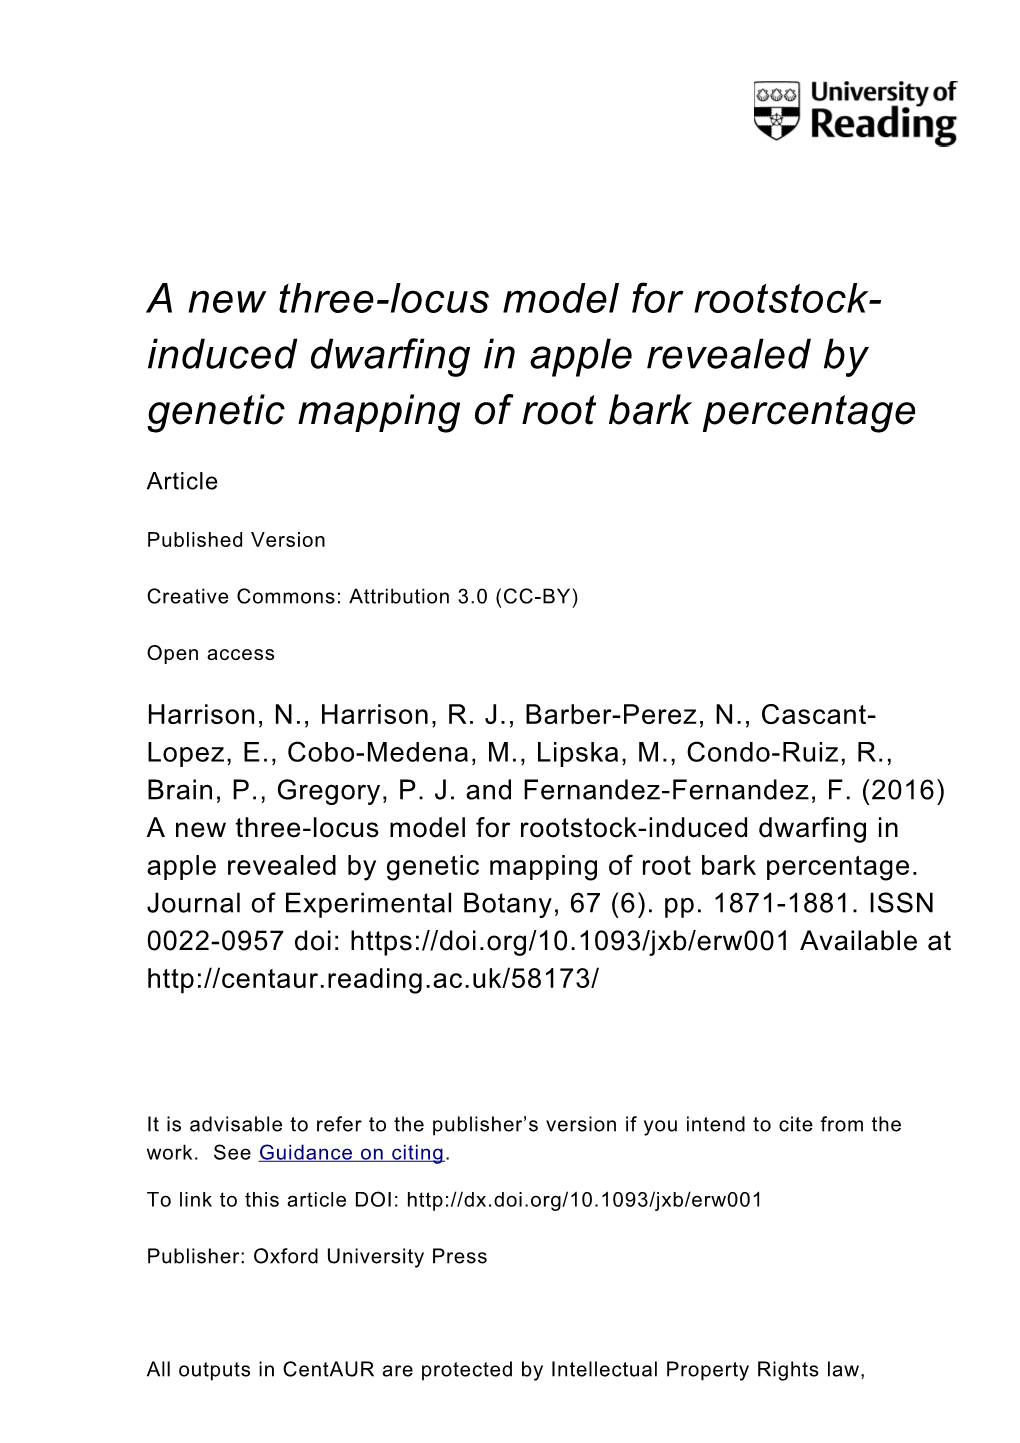 A New Three-Locus Model for Rootstock-Induced Dwarfing in Apple Revealed by Genetic Mapping of Root Bark Percentage